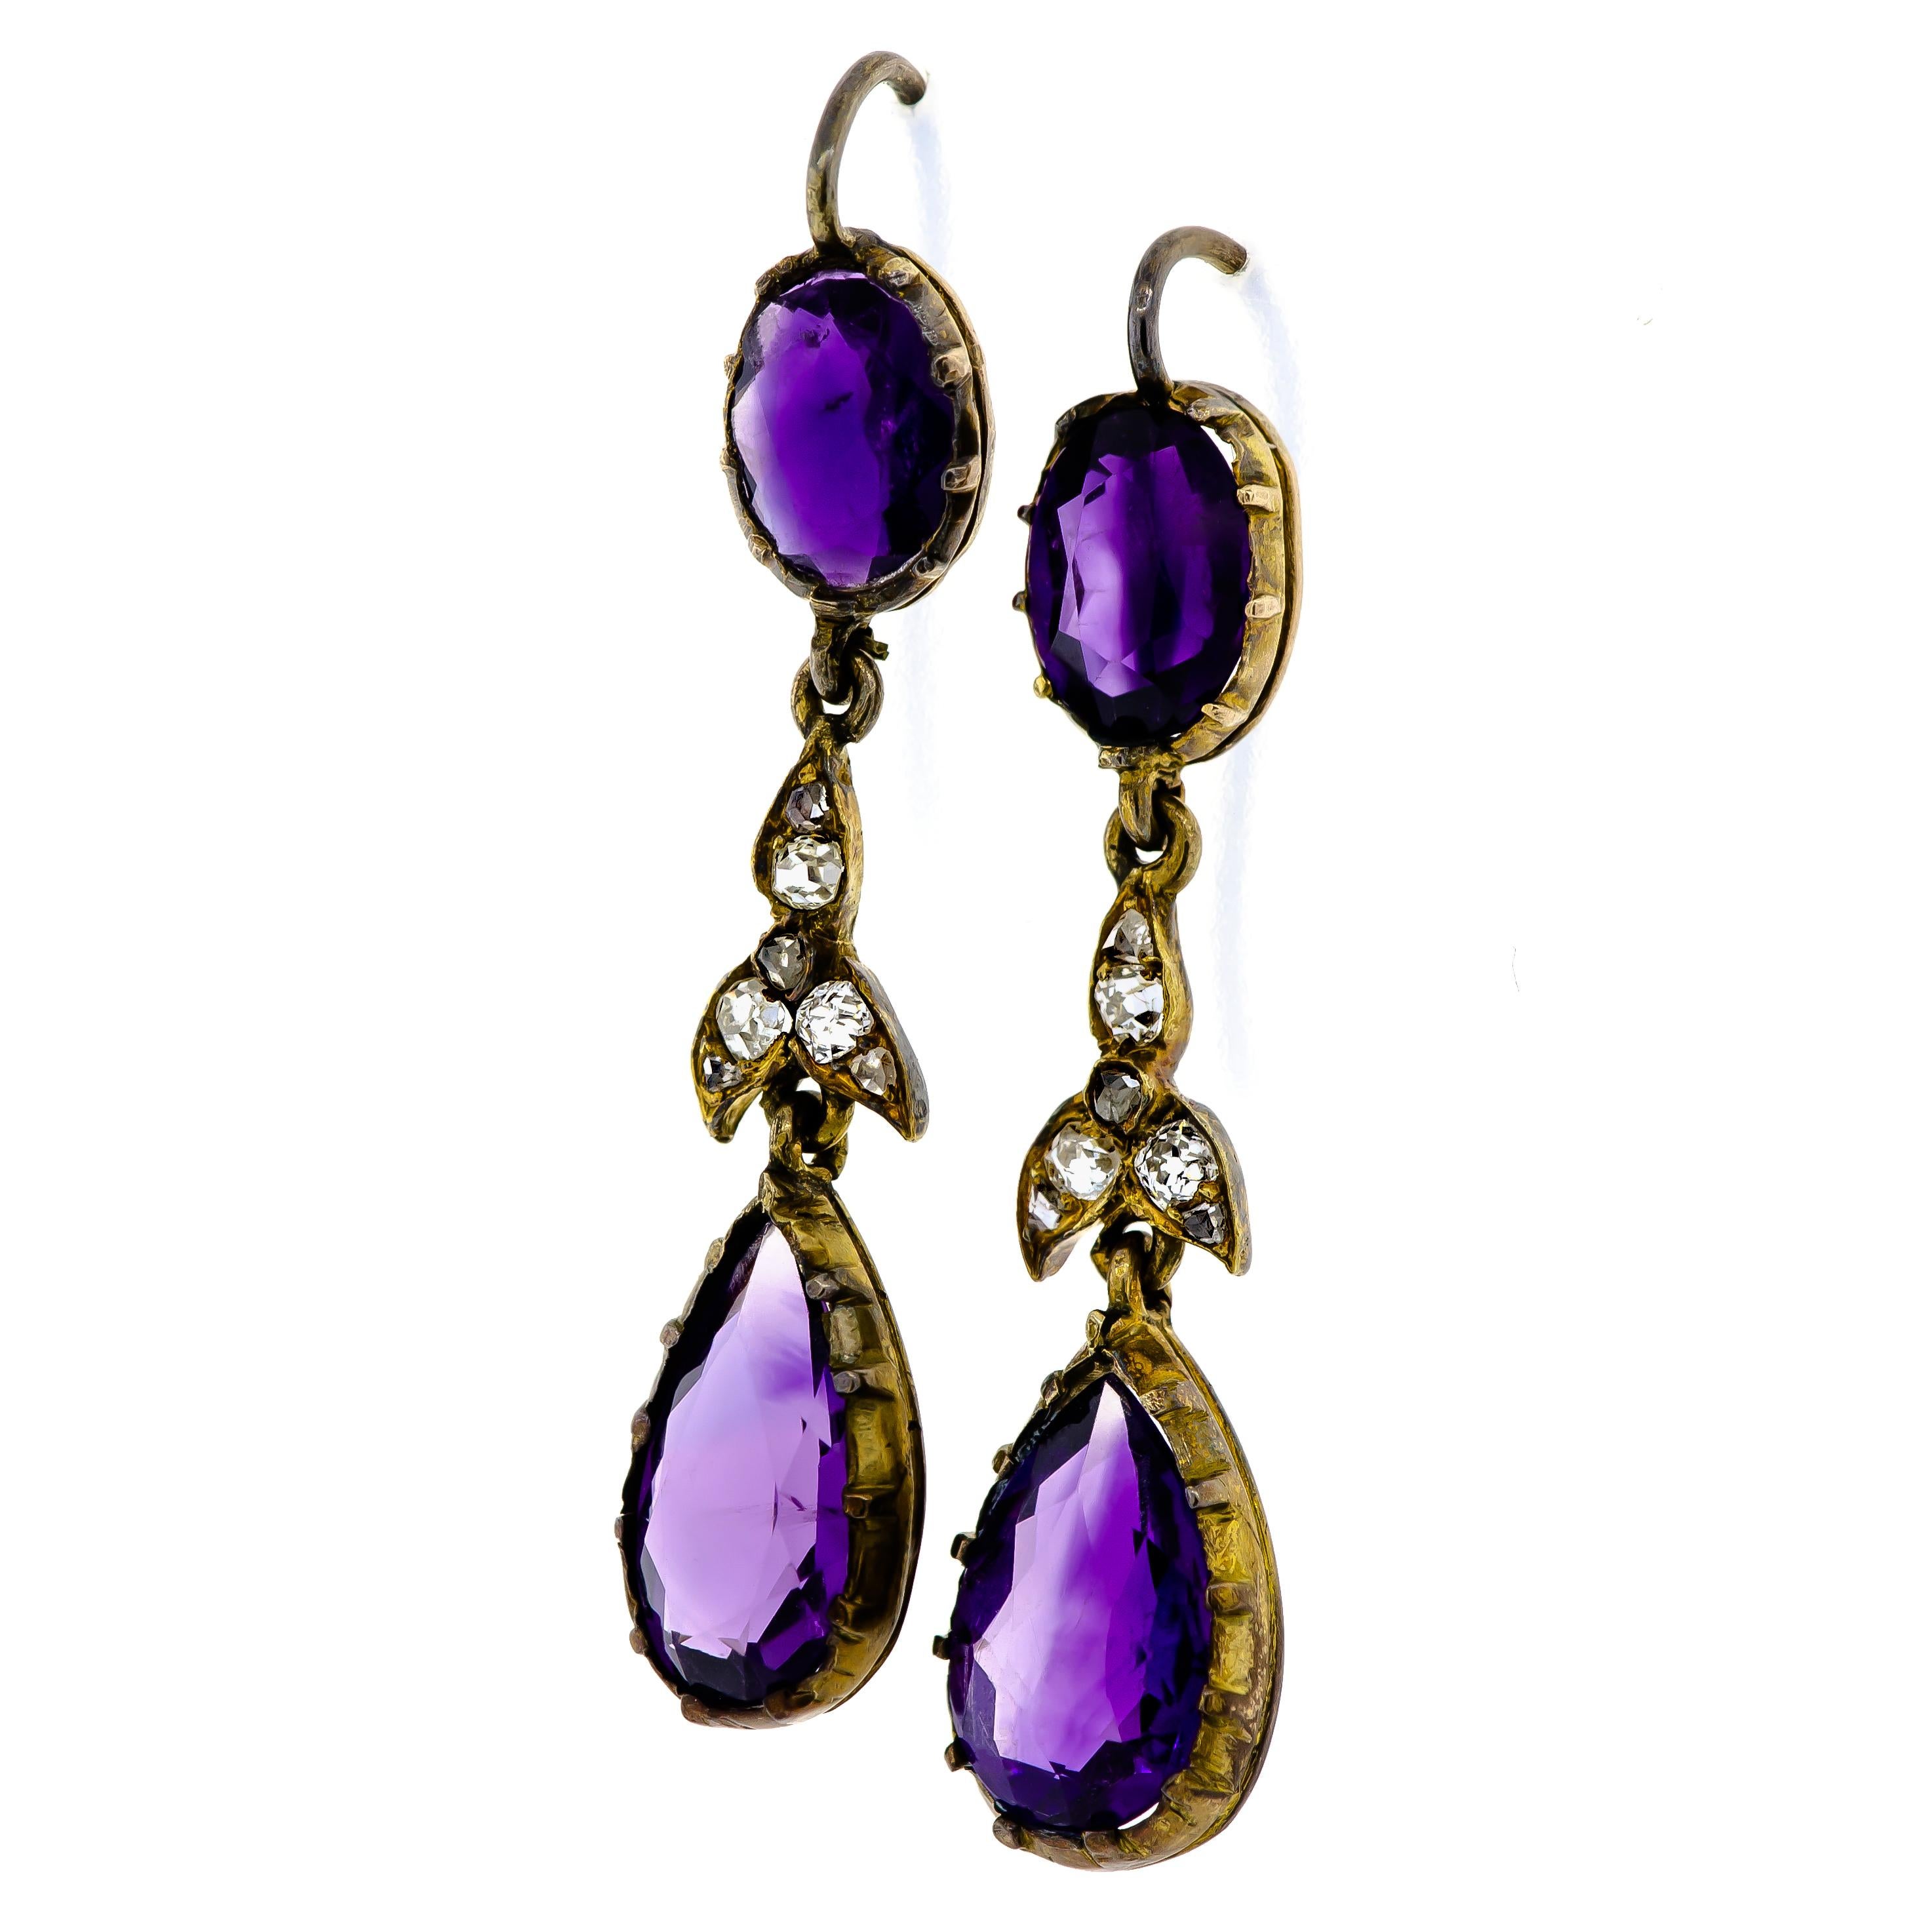 Beautiful Antique Turn-Of-The-Century amethyst and diamond earpendants, circa 1900, oval and pear shaped brilliant cut diamonds bezel set with accents of small round old cut diamonds shepherd hook wires for pierced ears, 14 karat yellow gold,